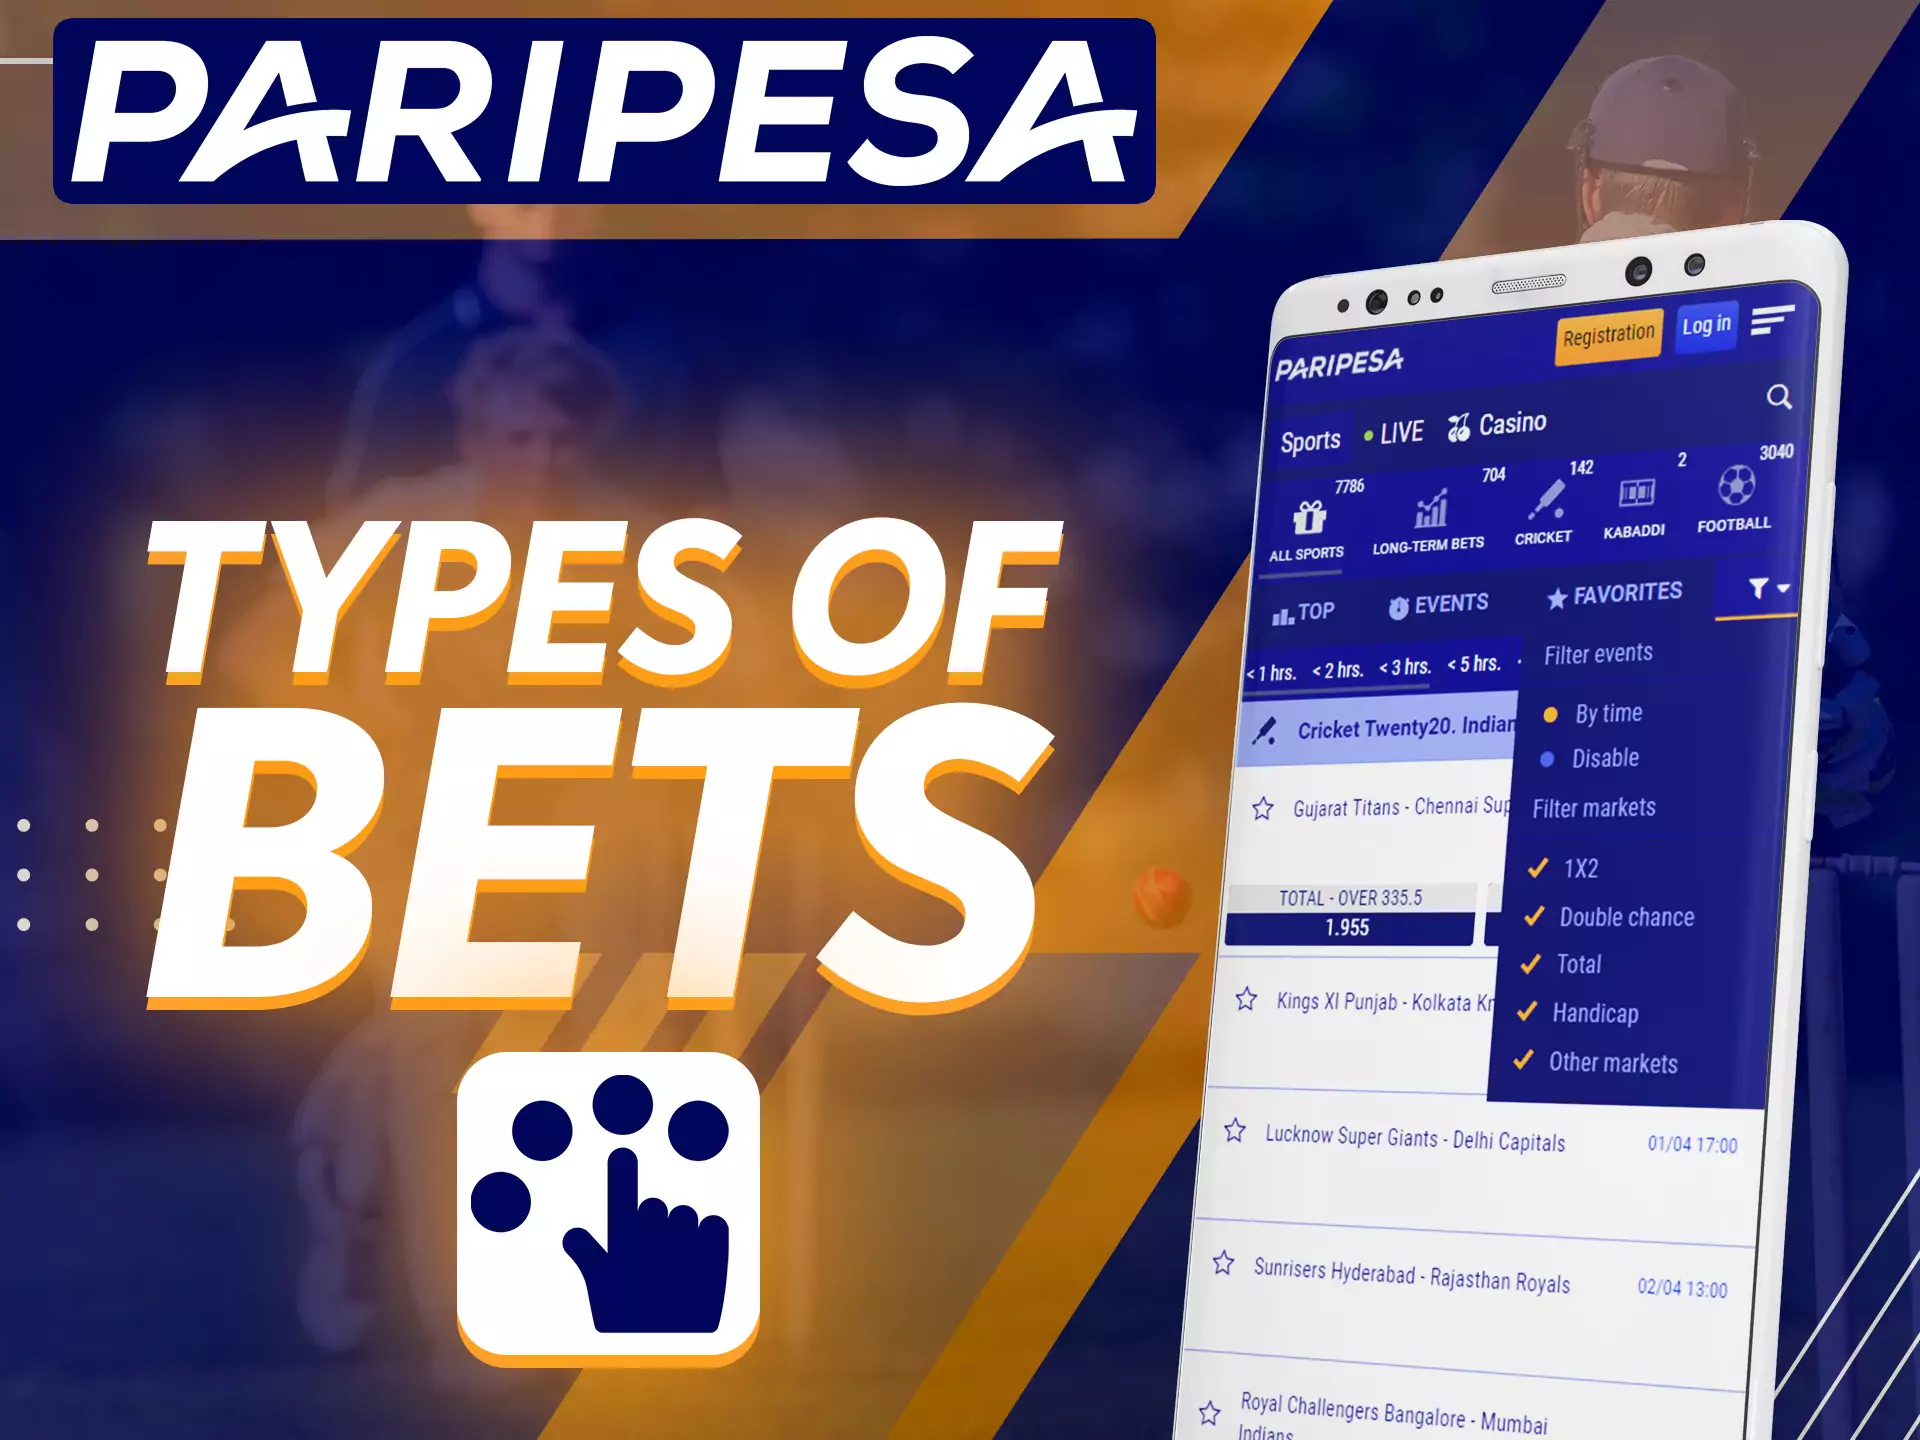 Try different types of bets on Paripesa.